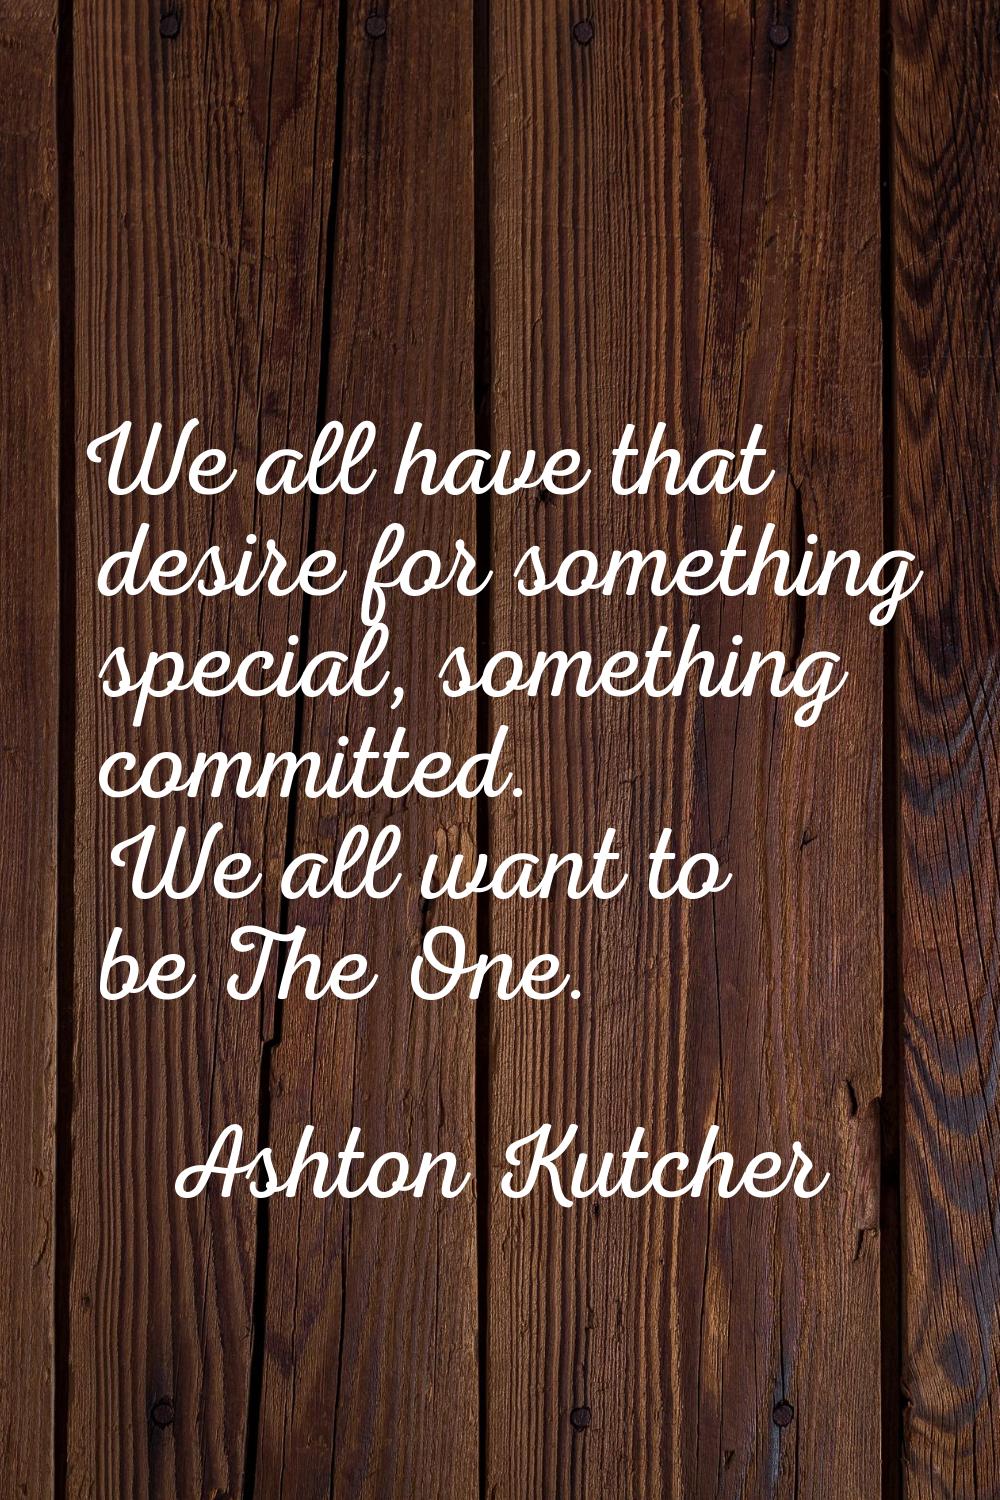 We all have that desire for something special, something committed. We all want to be The One.